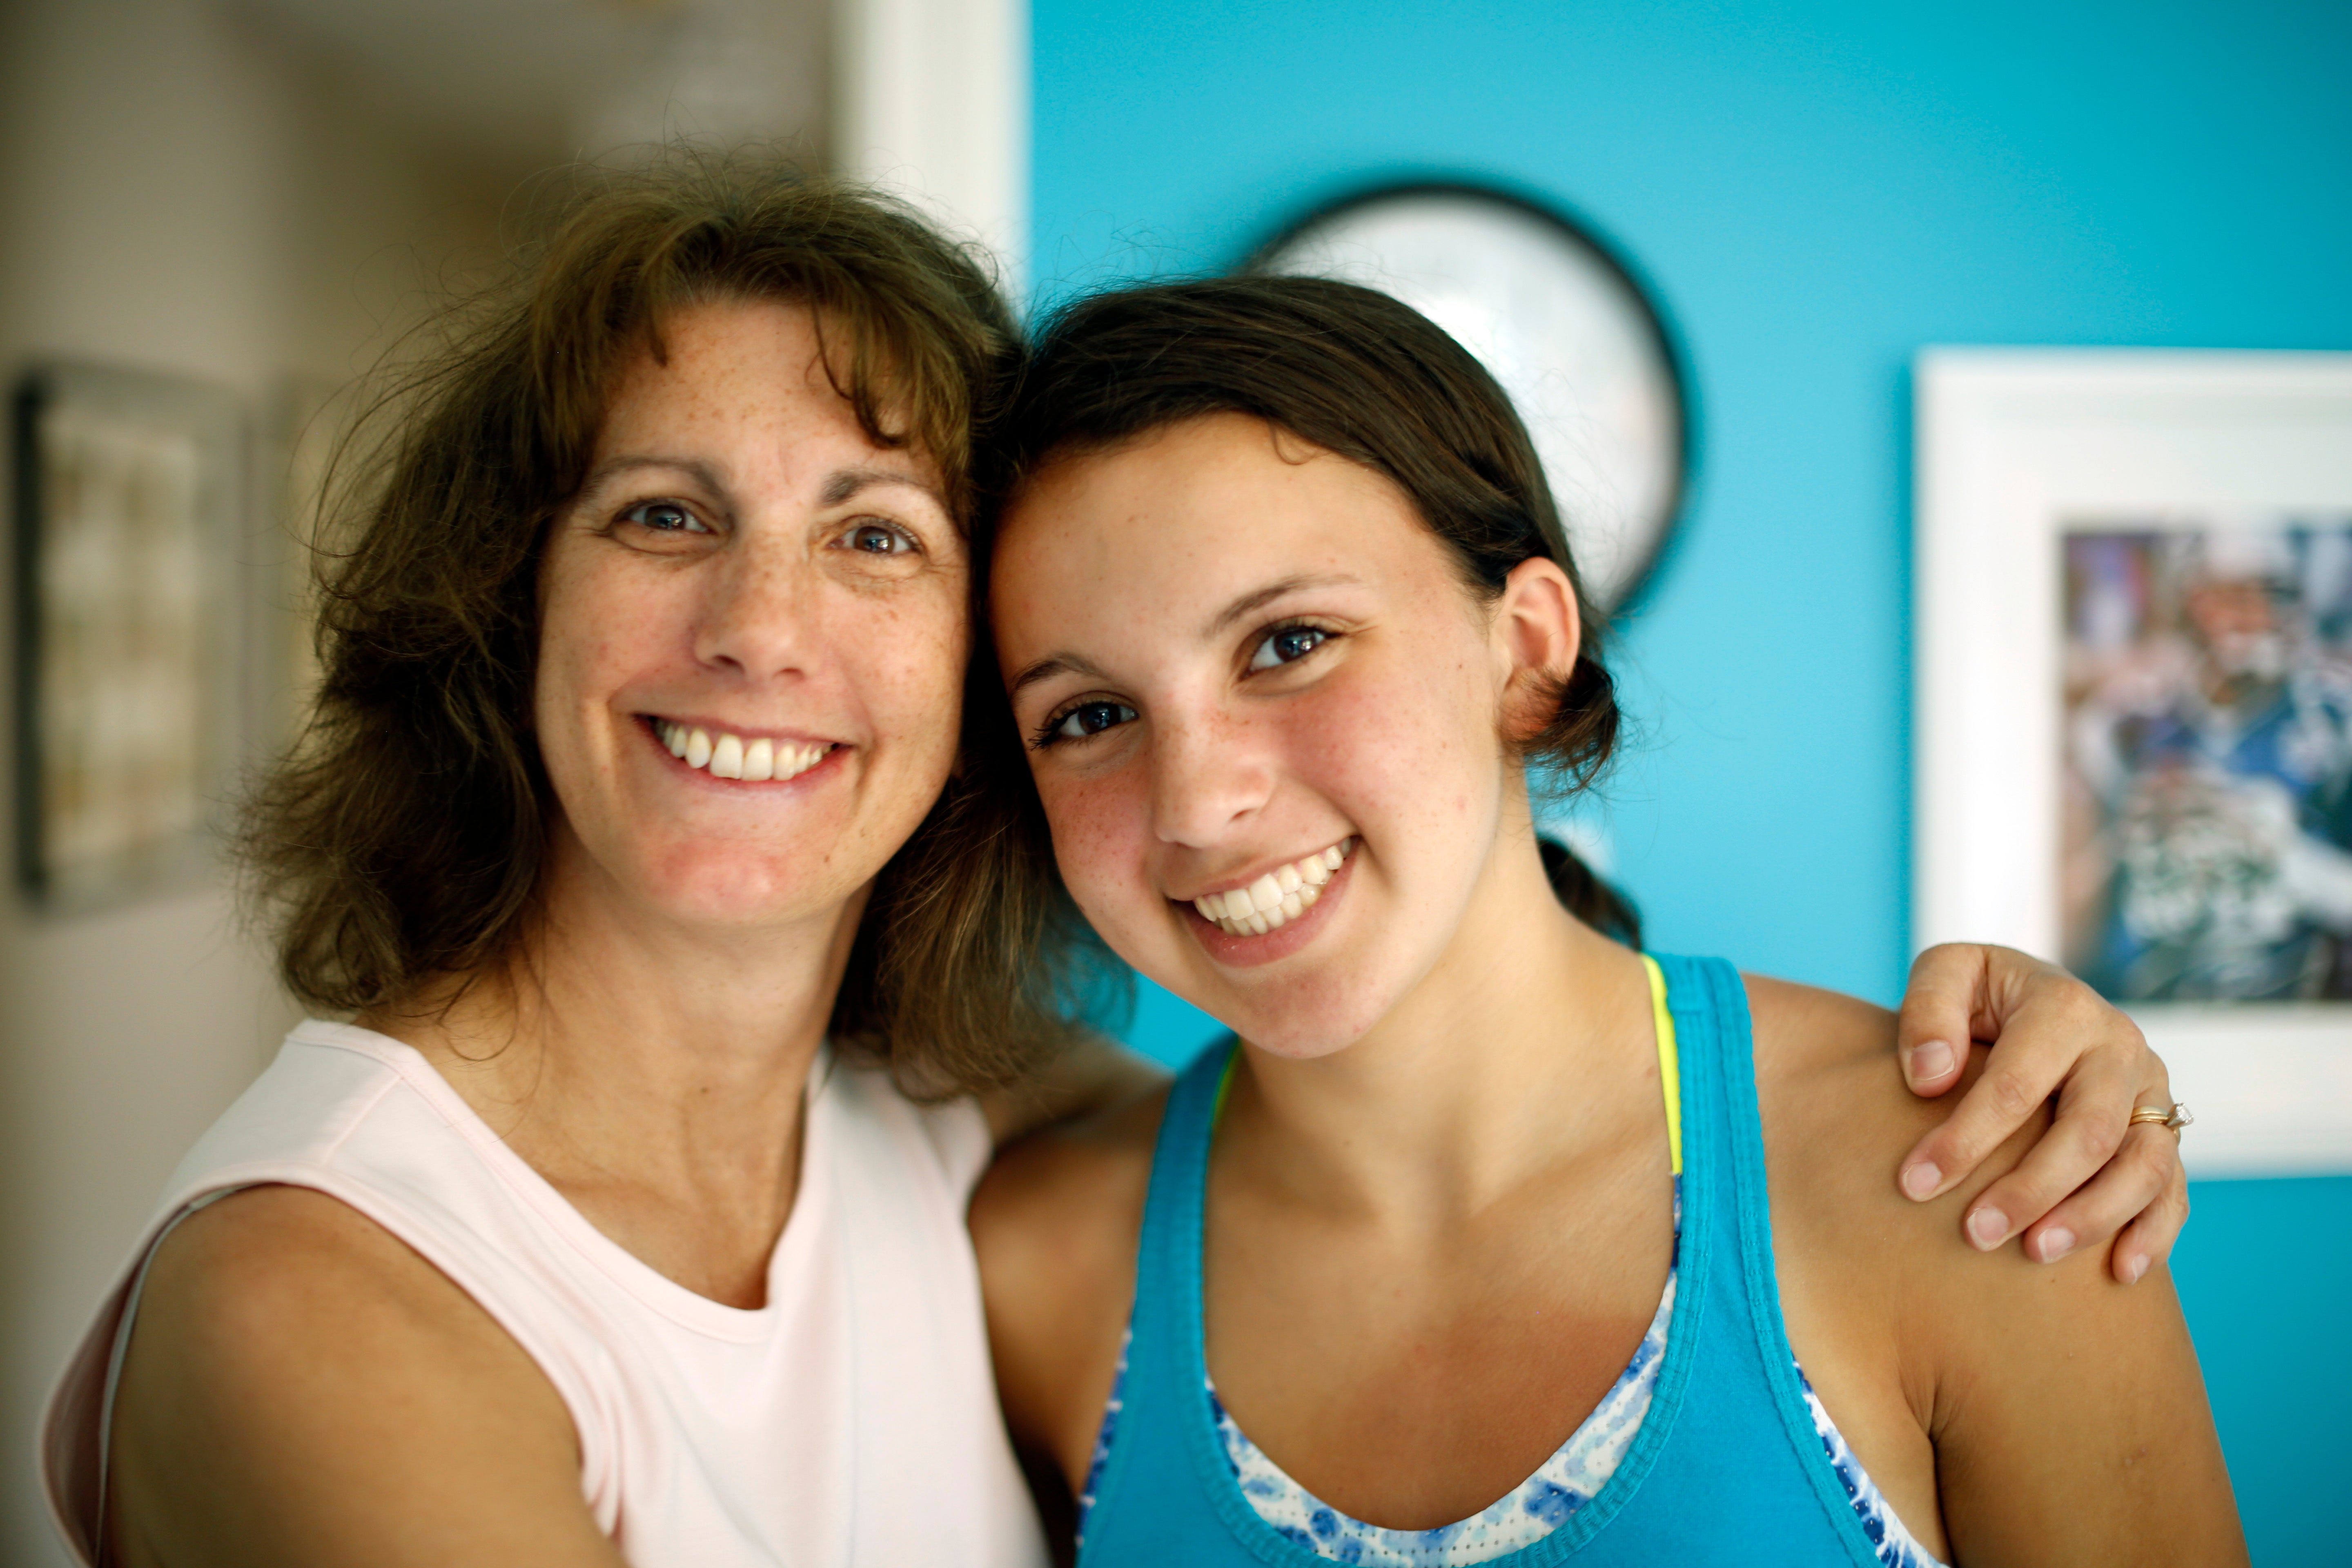 Carly Coughlin (right) with her mother Joanne (left)